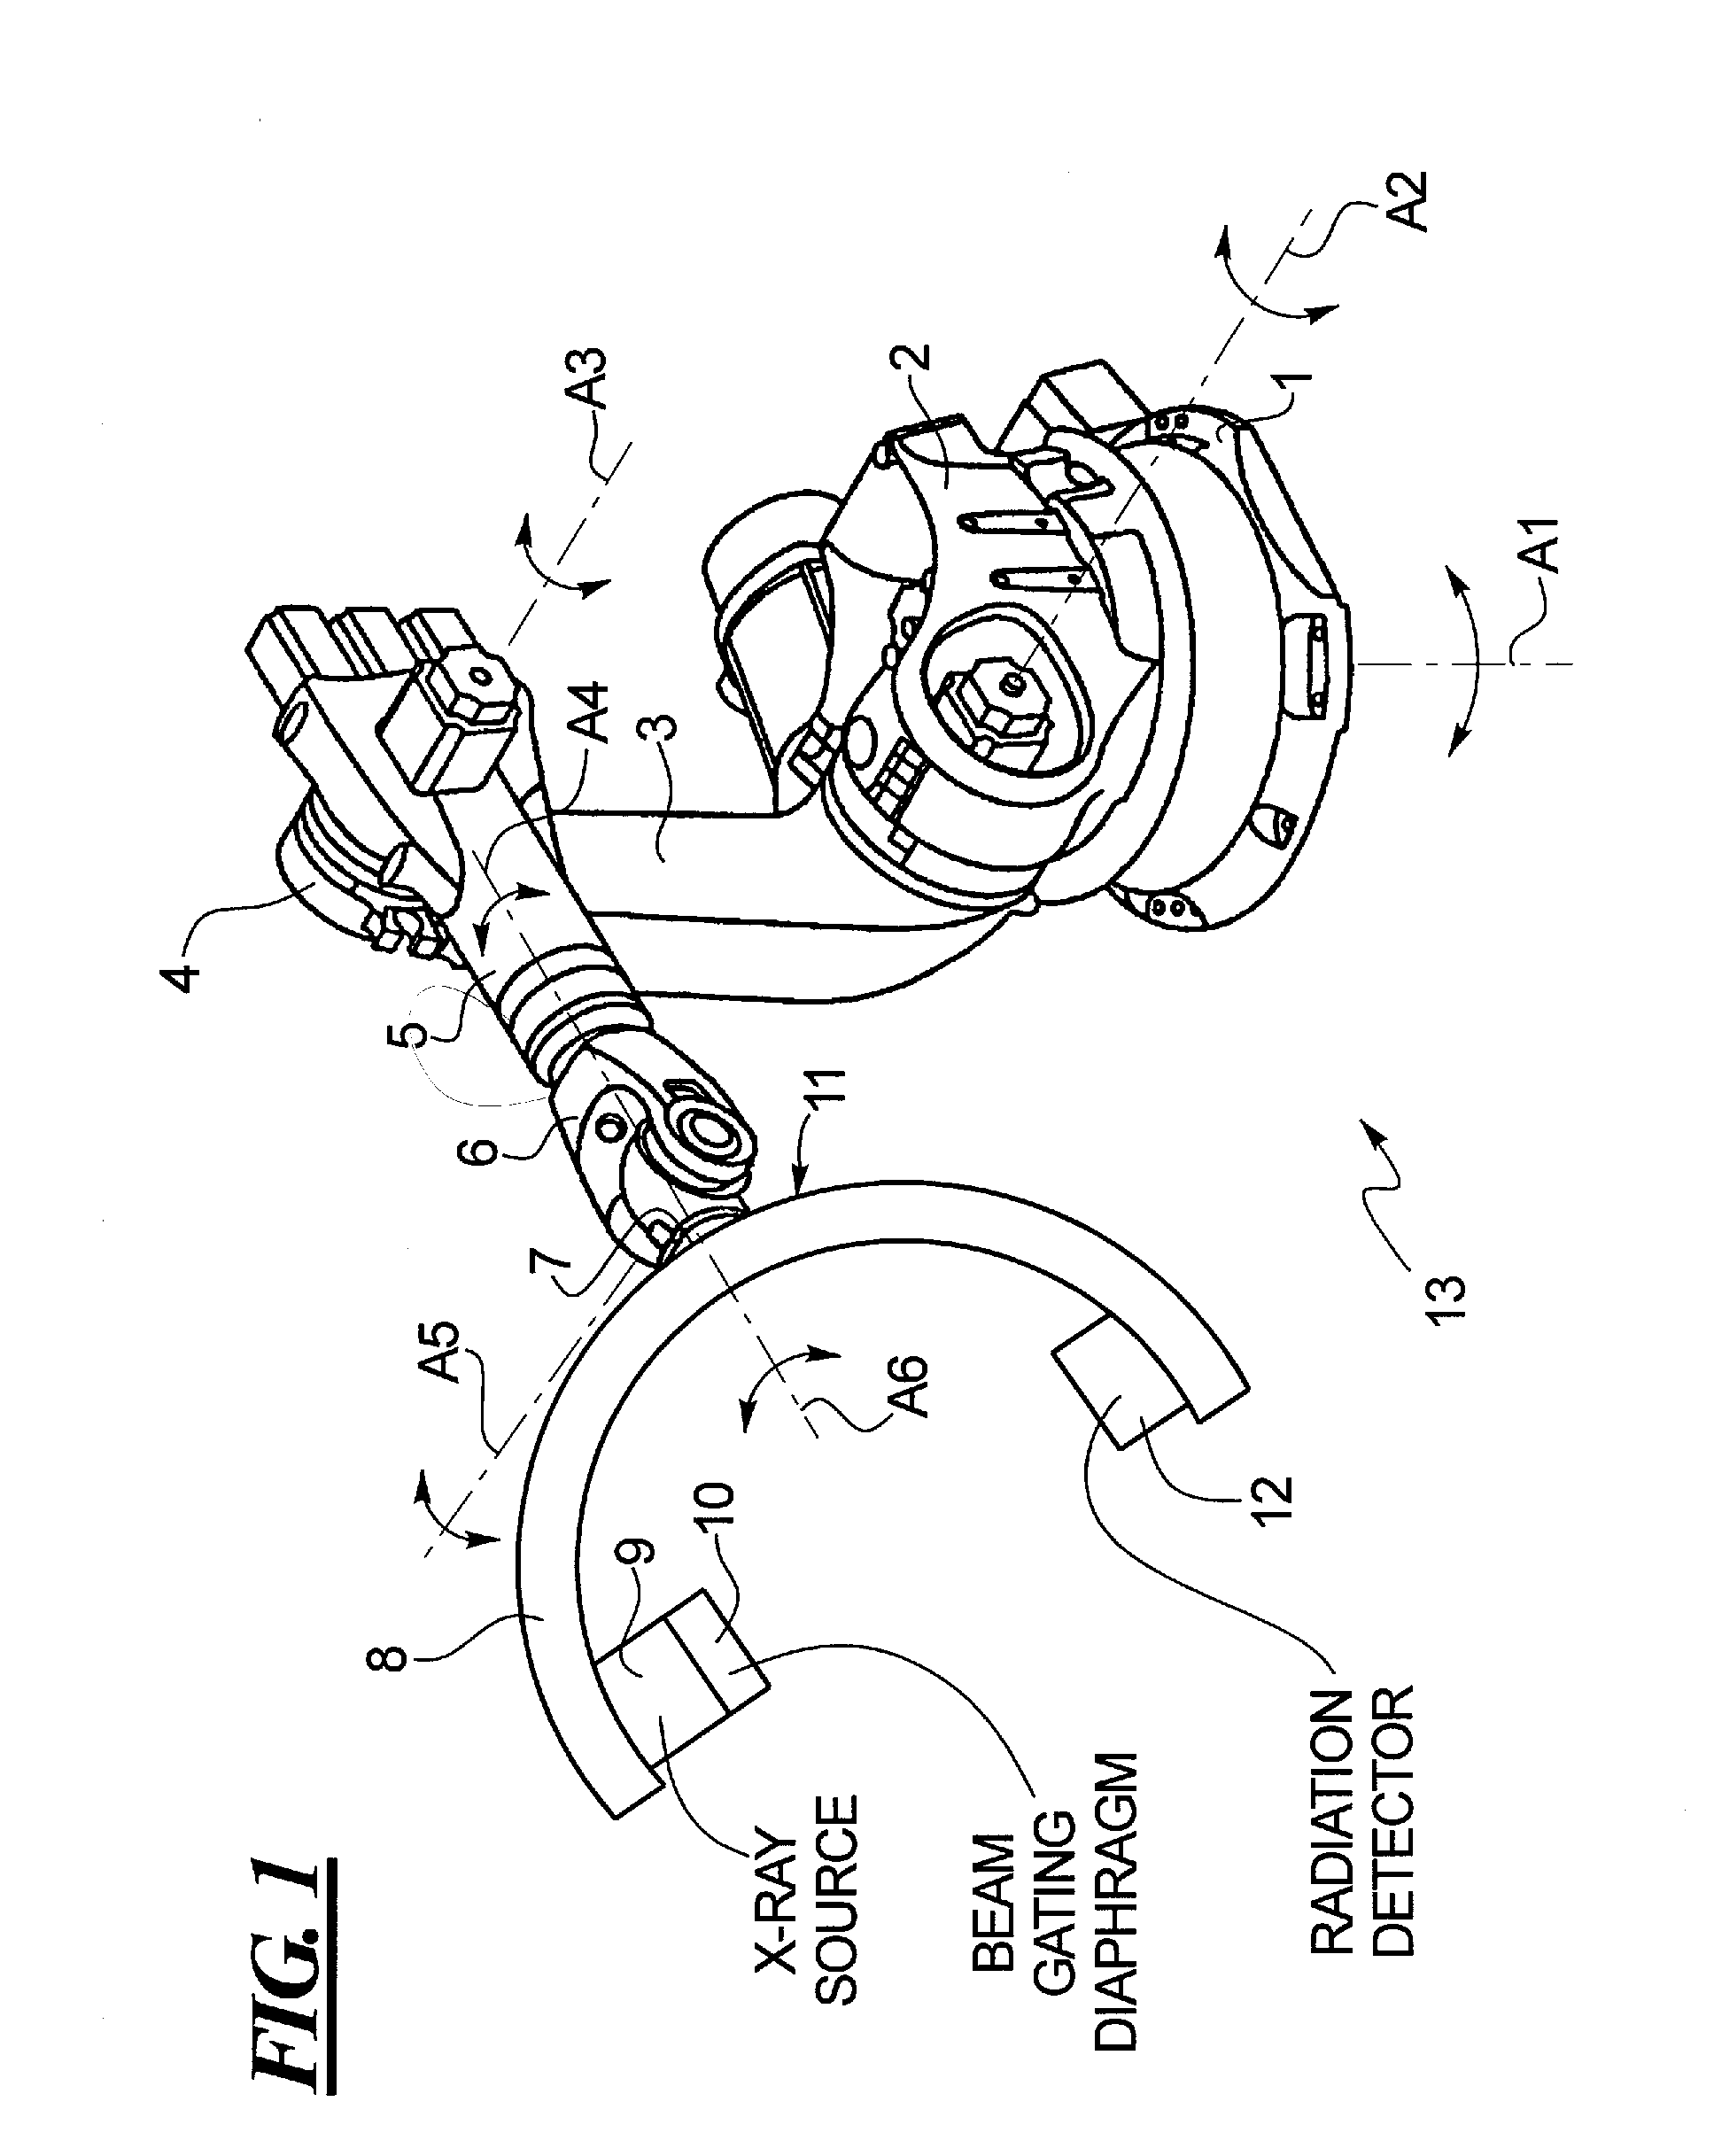 Method and apparatus for conducting an interventional procedure involving heart valves using a robot-based x-ray device